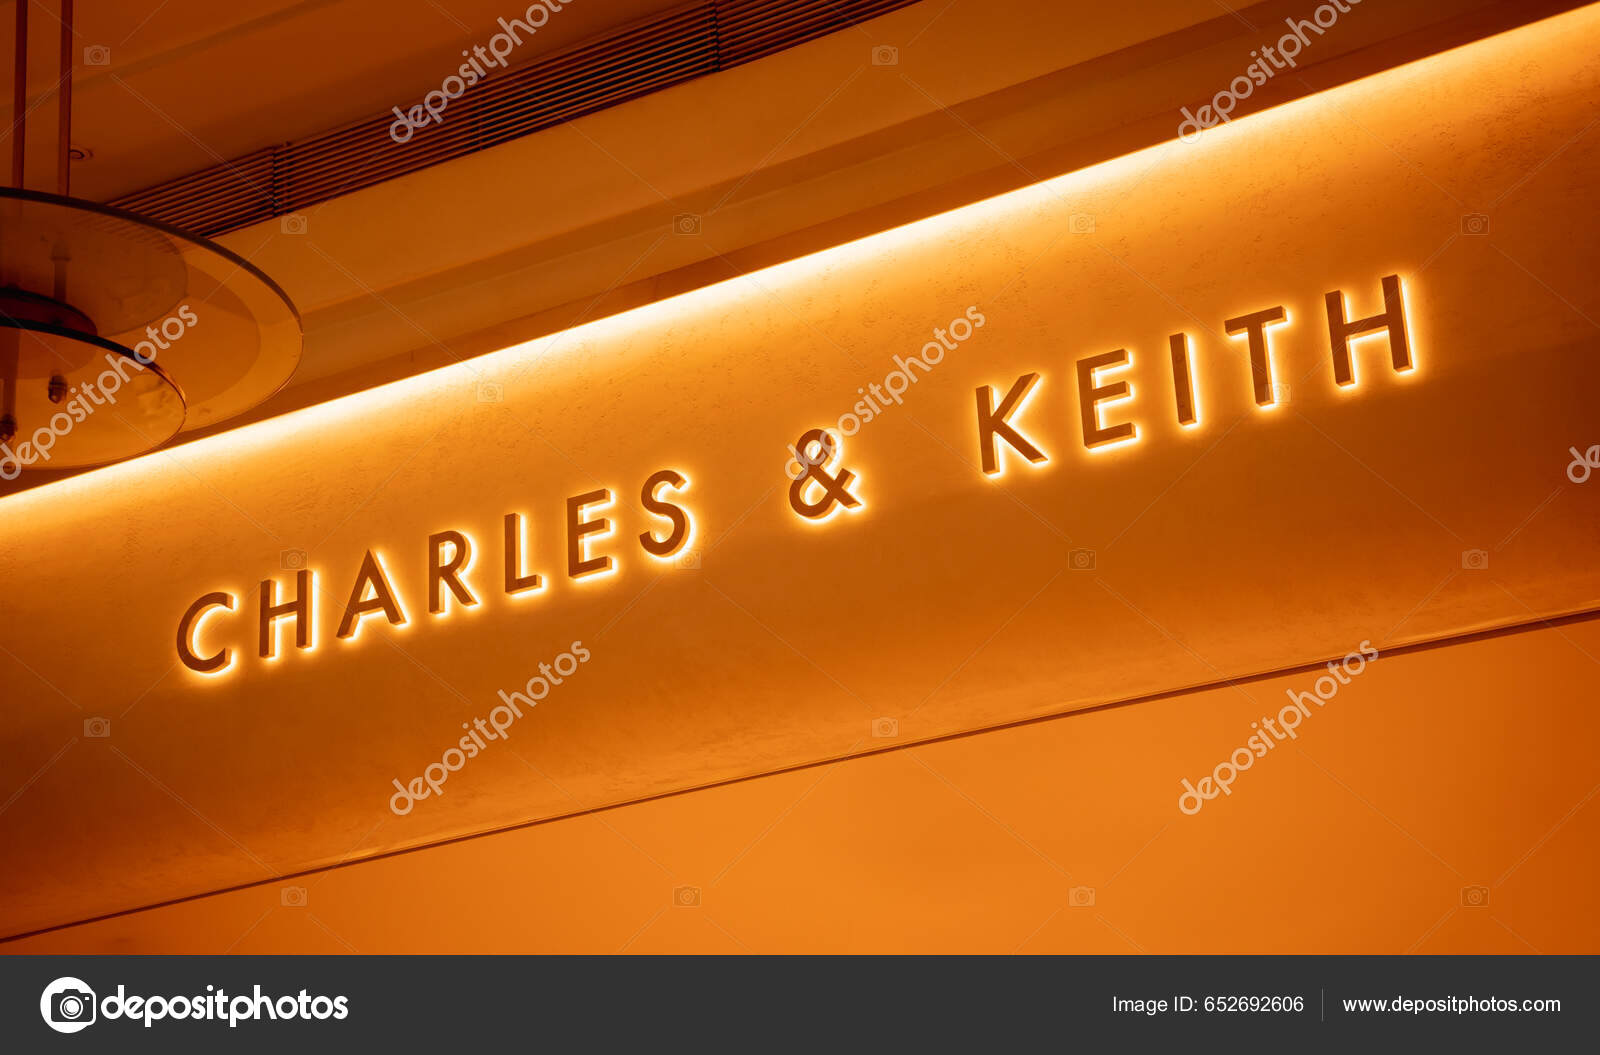 charles and keith store